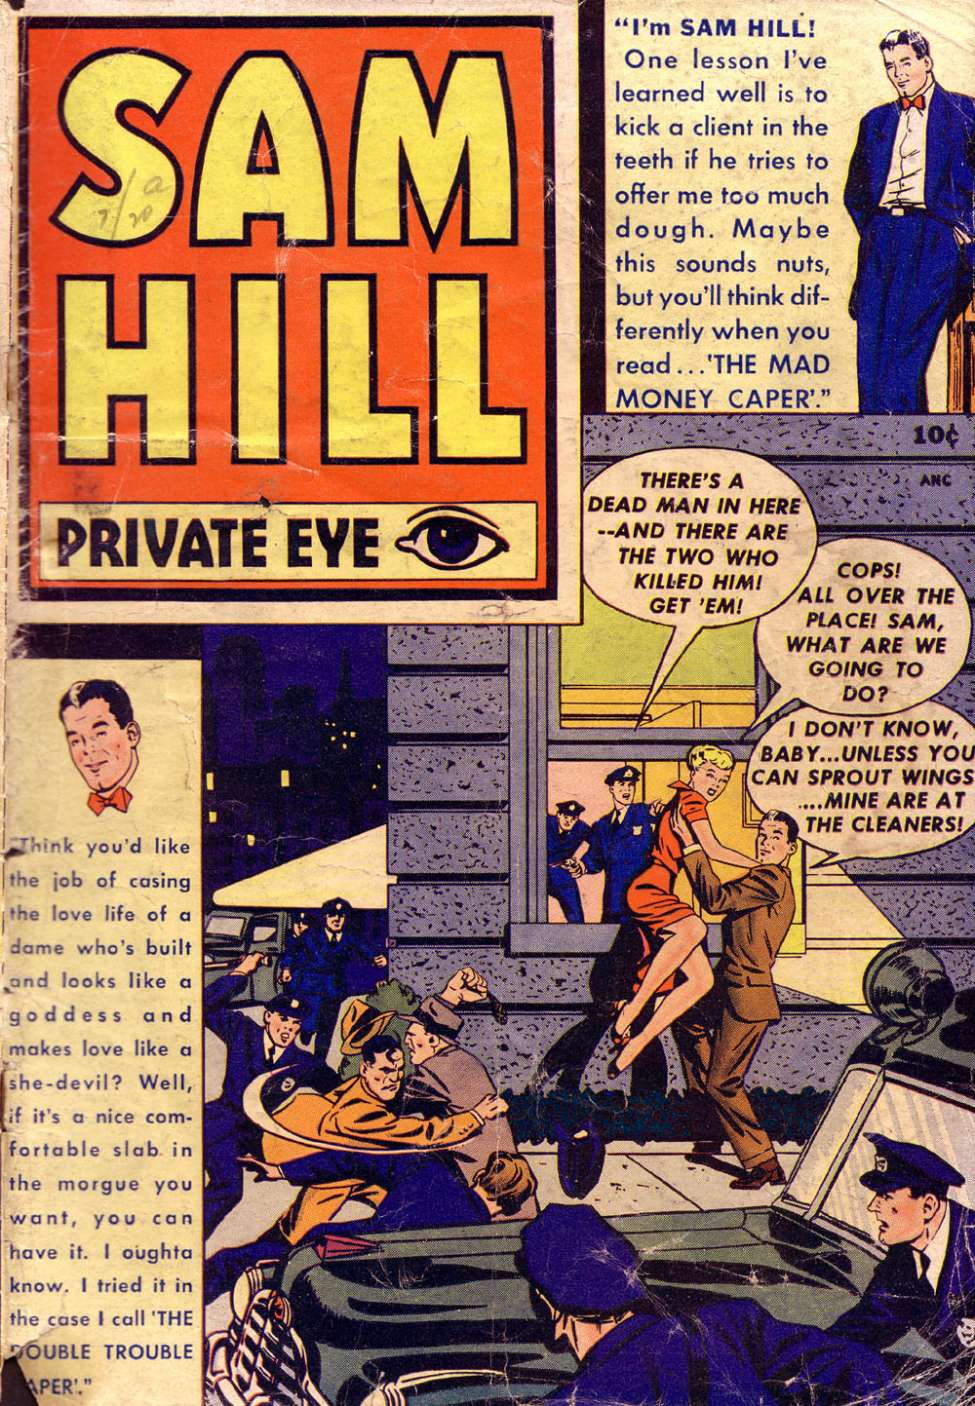 Comic Book Cover For Sam Hill Private Eye 1